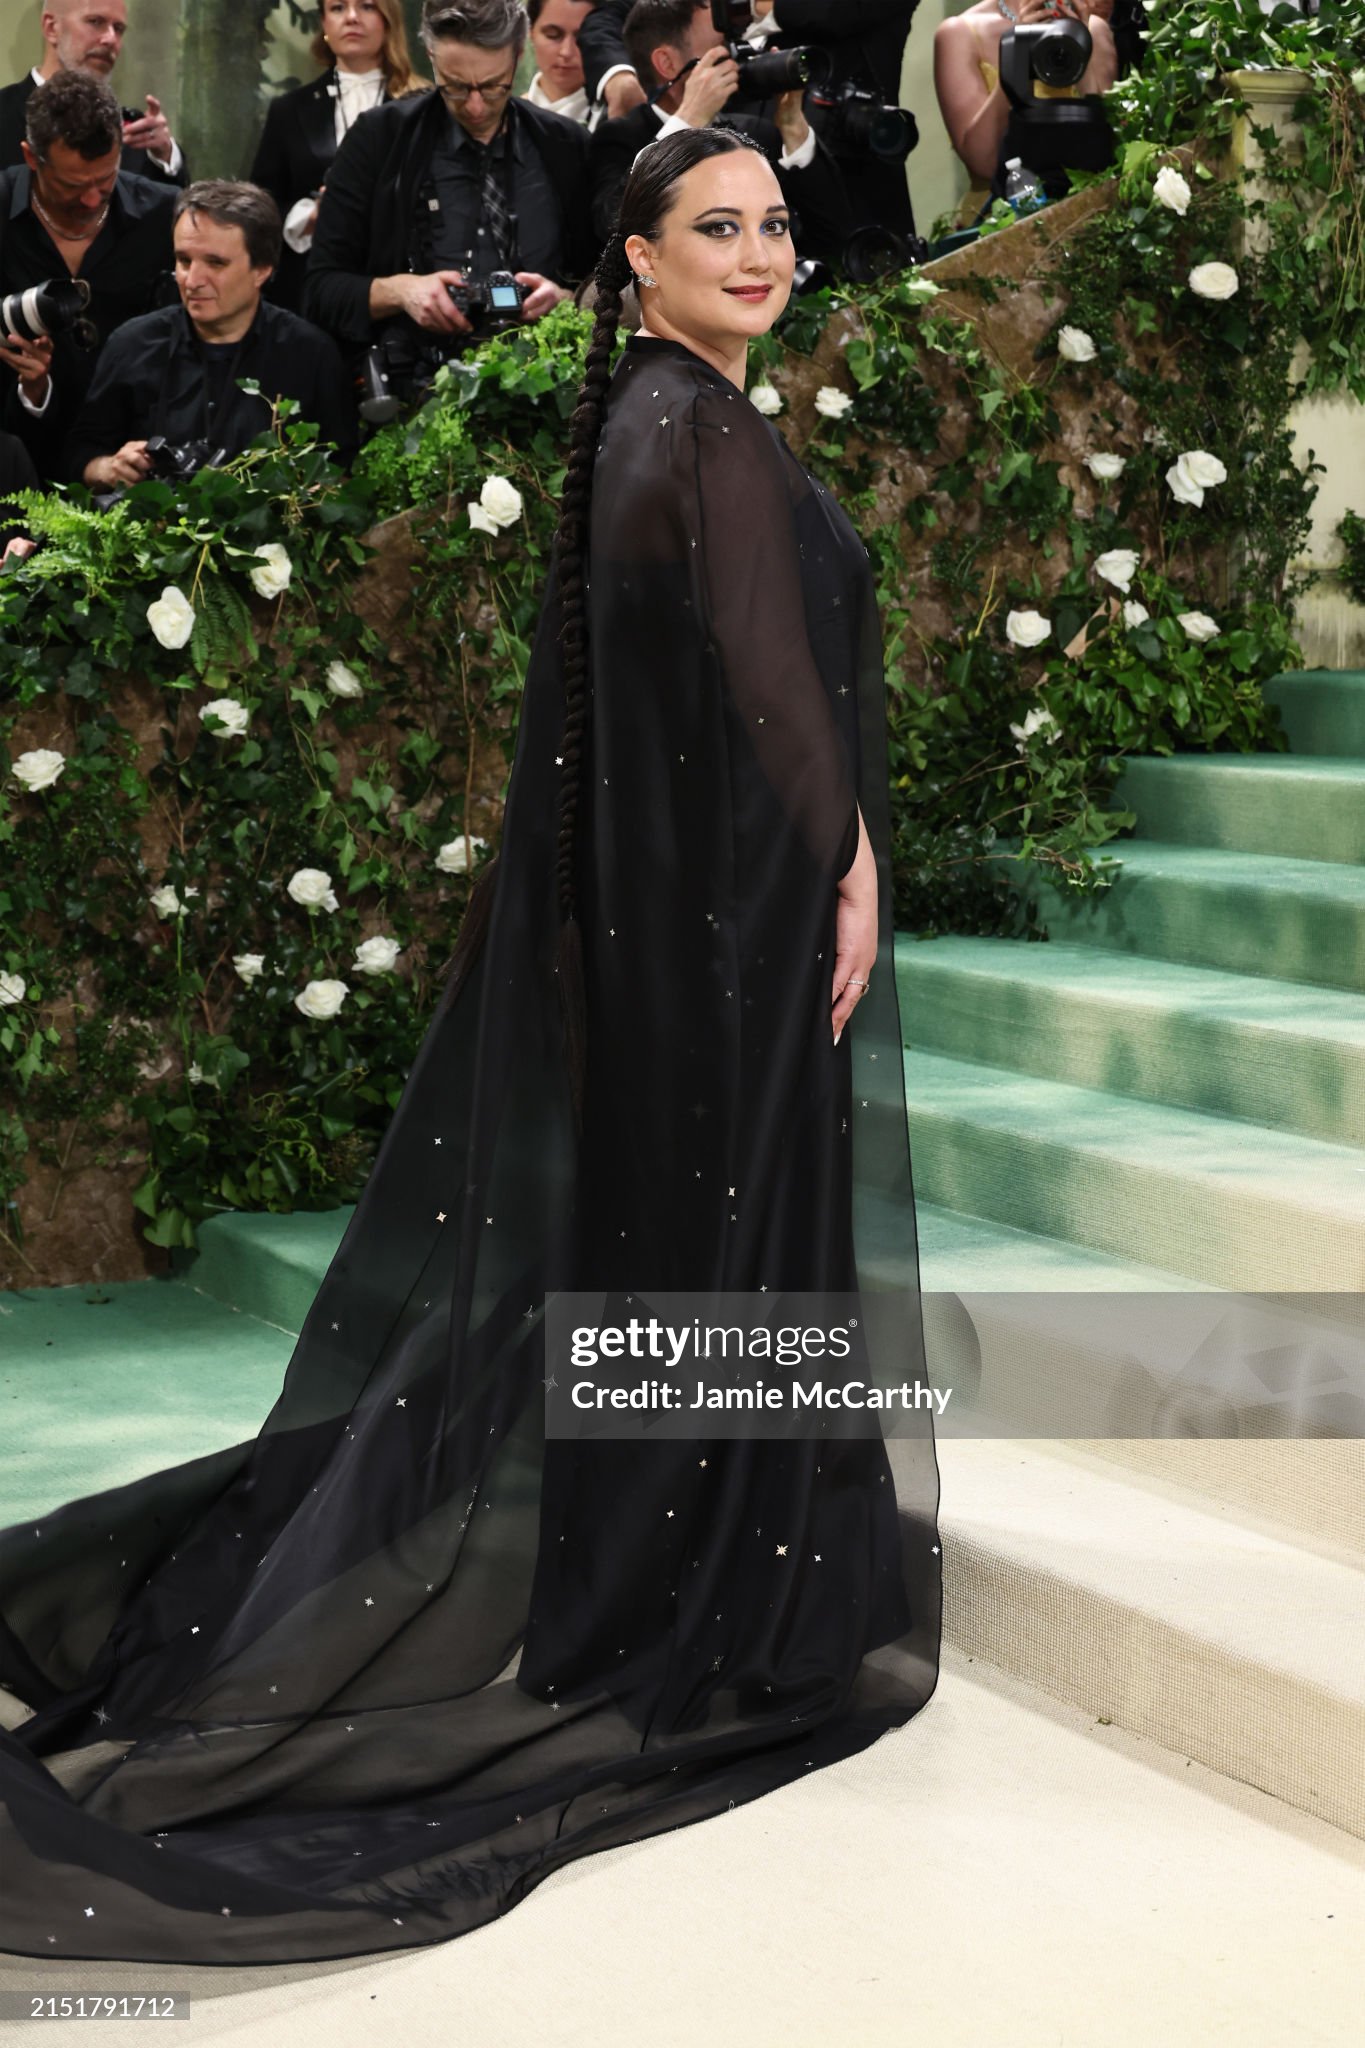 gettyimages-2151791712-2048x2048.jpg